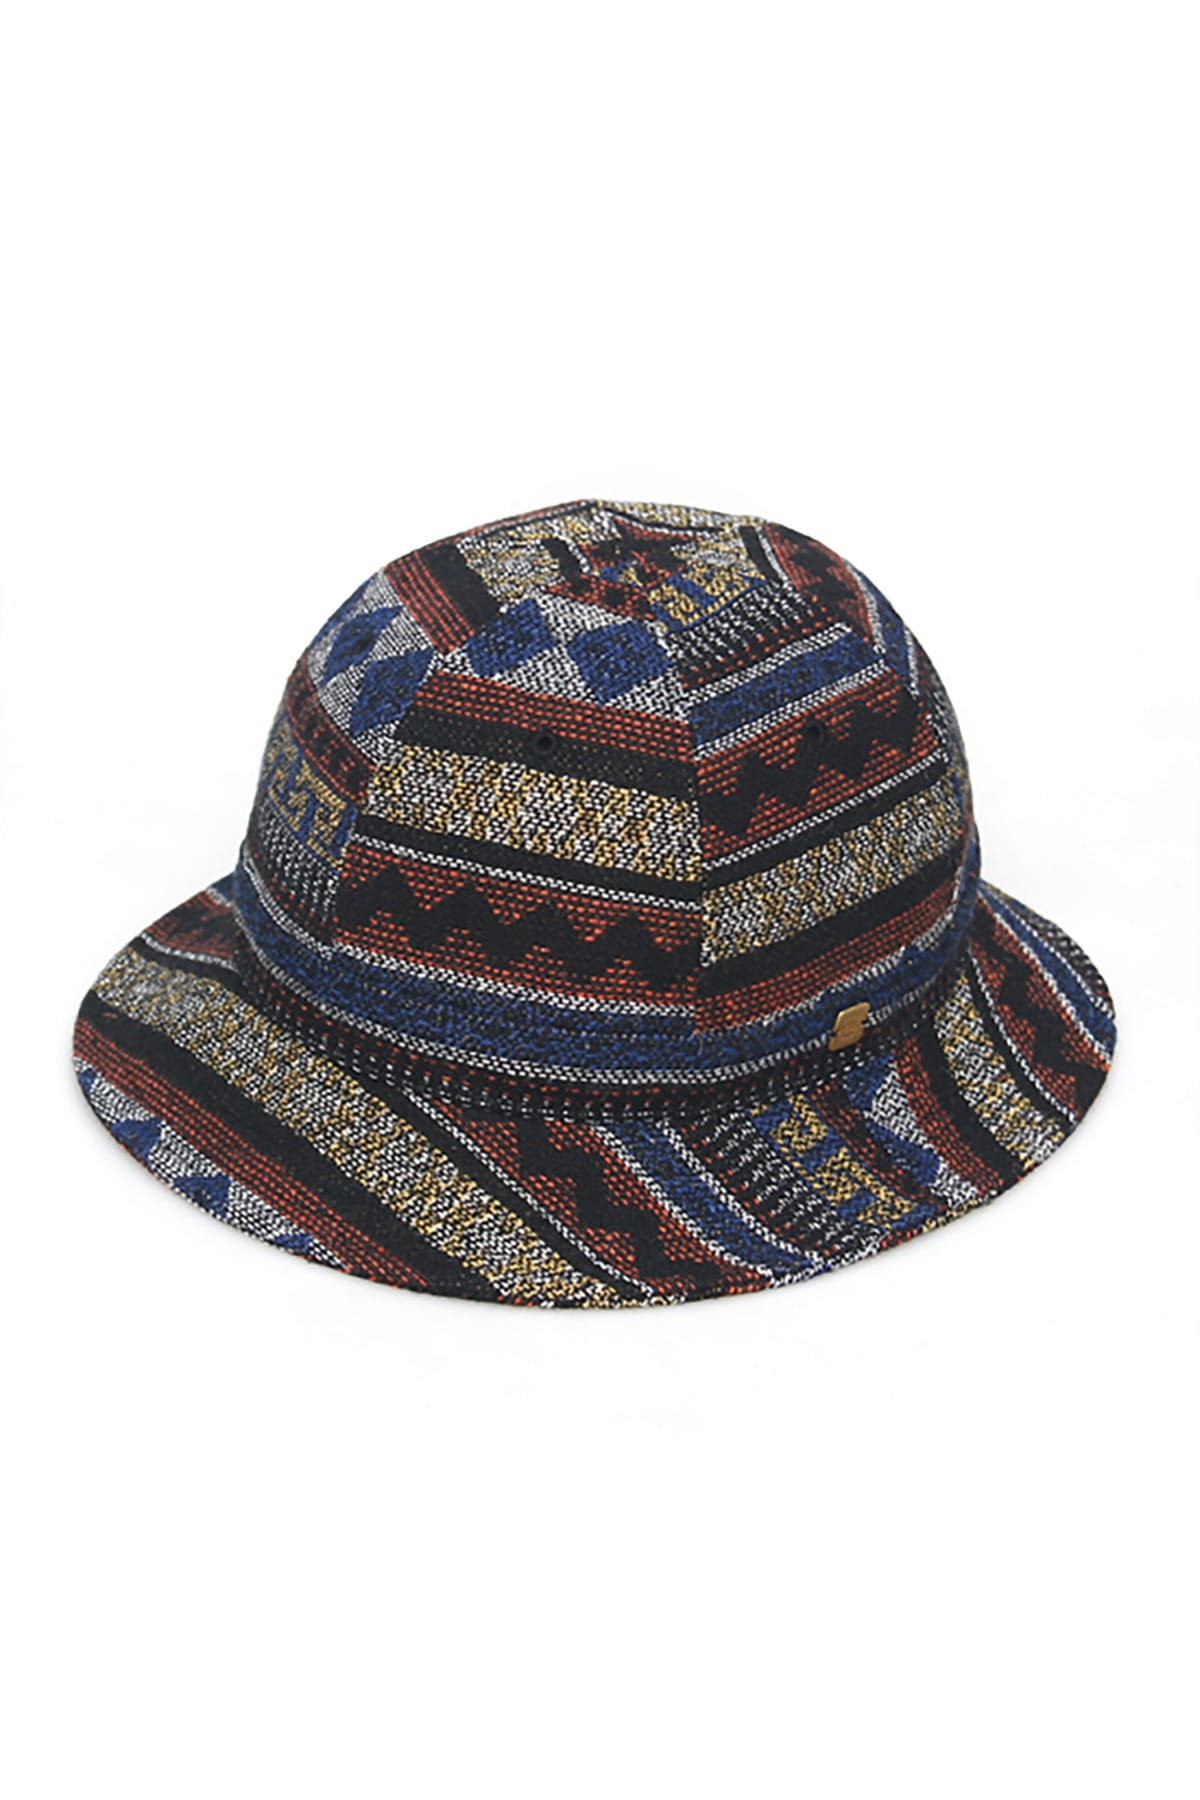 BUCKET / JACQUARD PACK / INDIAN